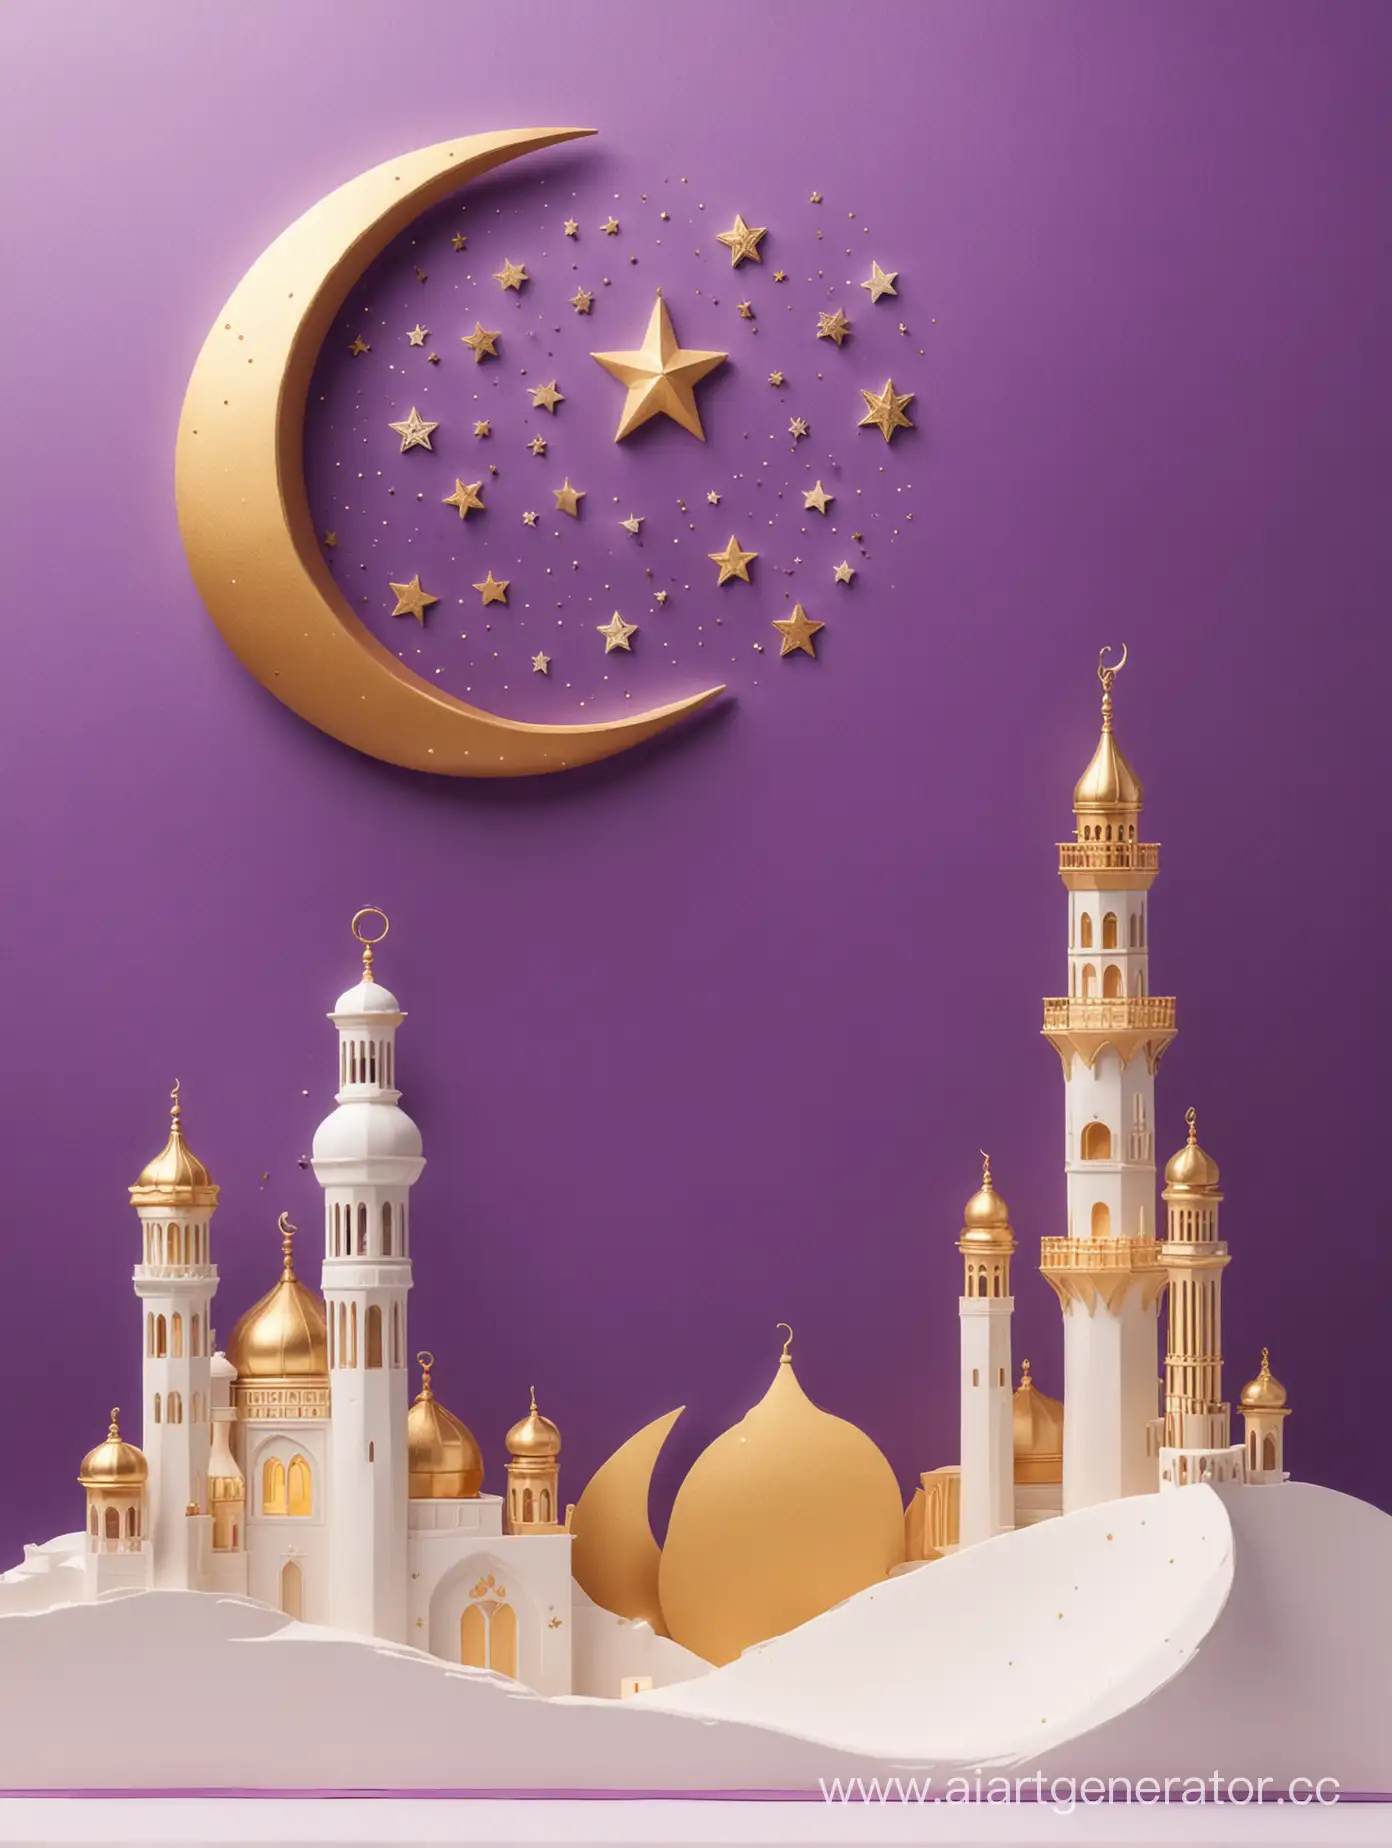 golden and purple Ramadan scene with a crescent moon, minaret, mehrab, and star, white background